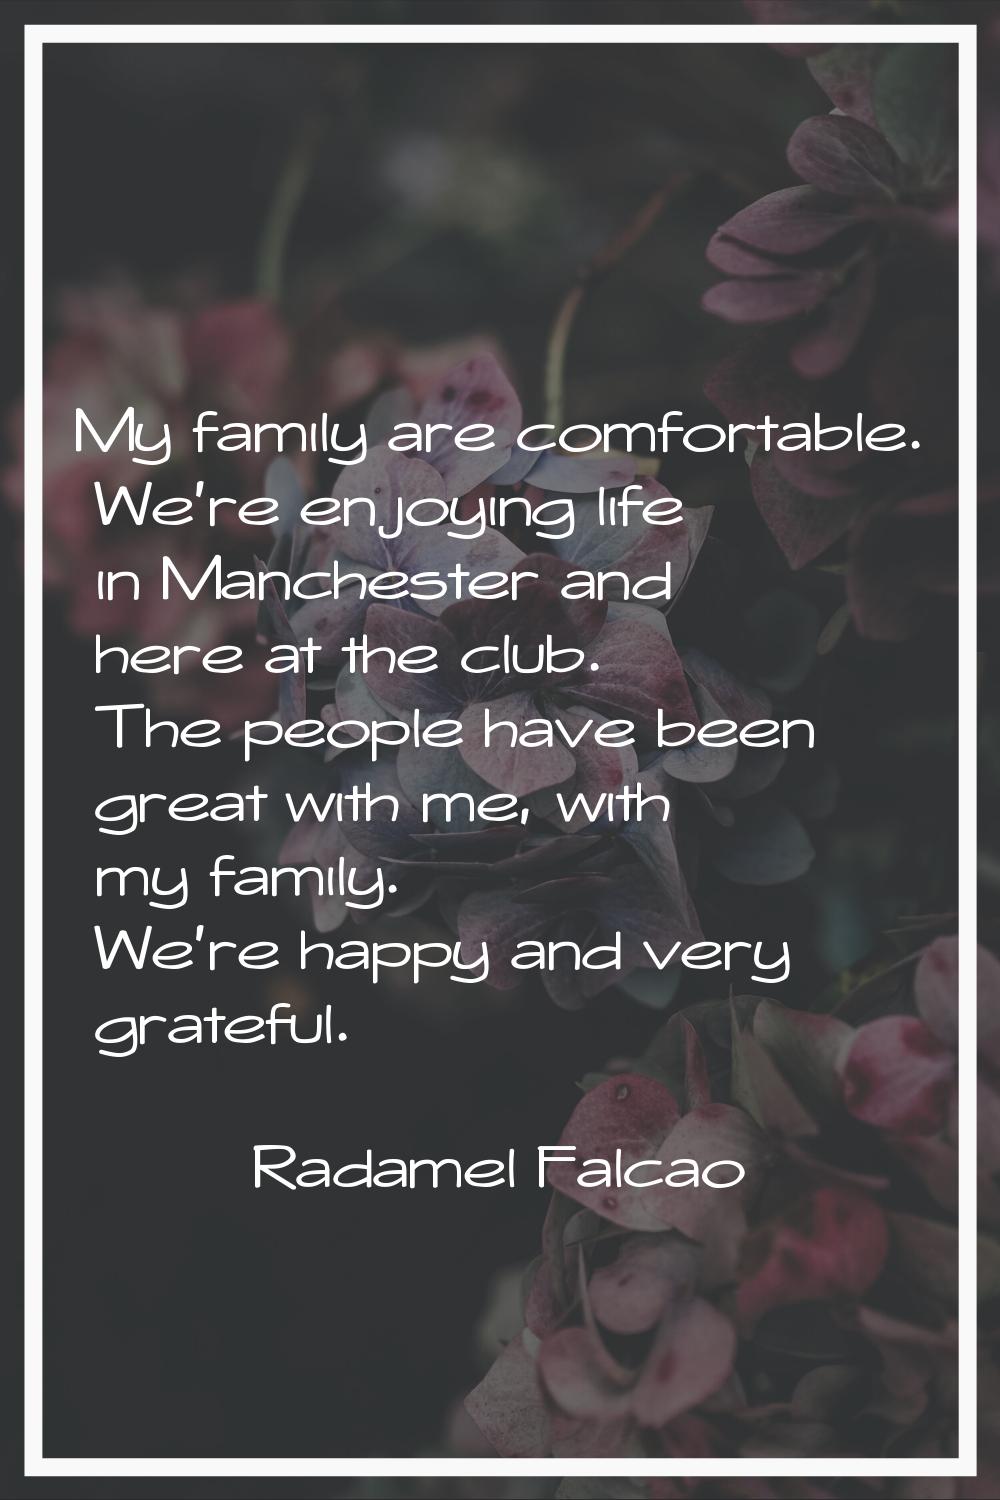 My family are comfortable. We're enjoying life in Manchester and here at the club. The people have 